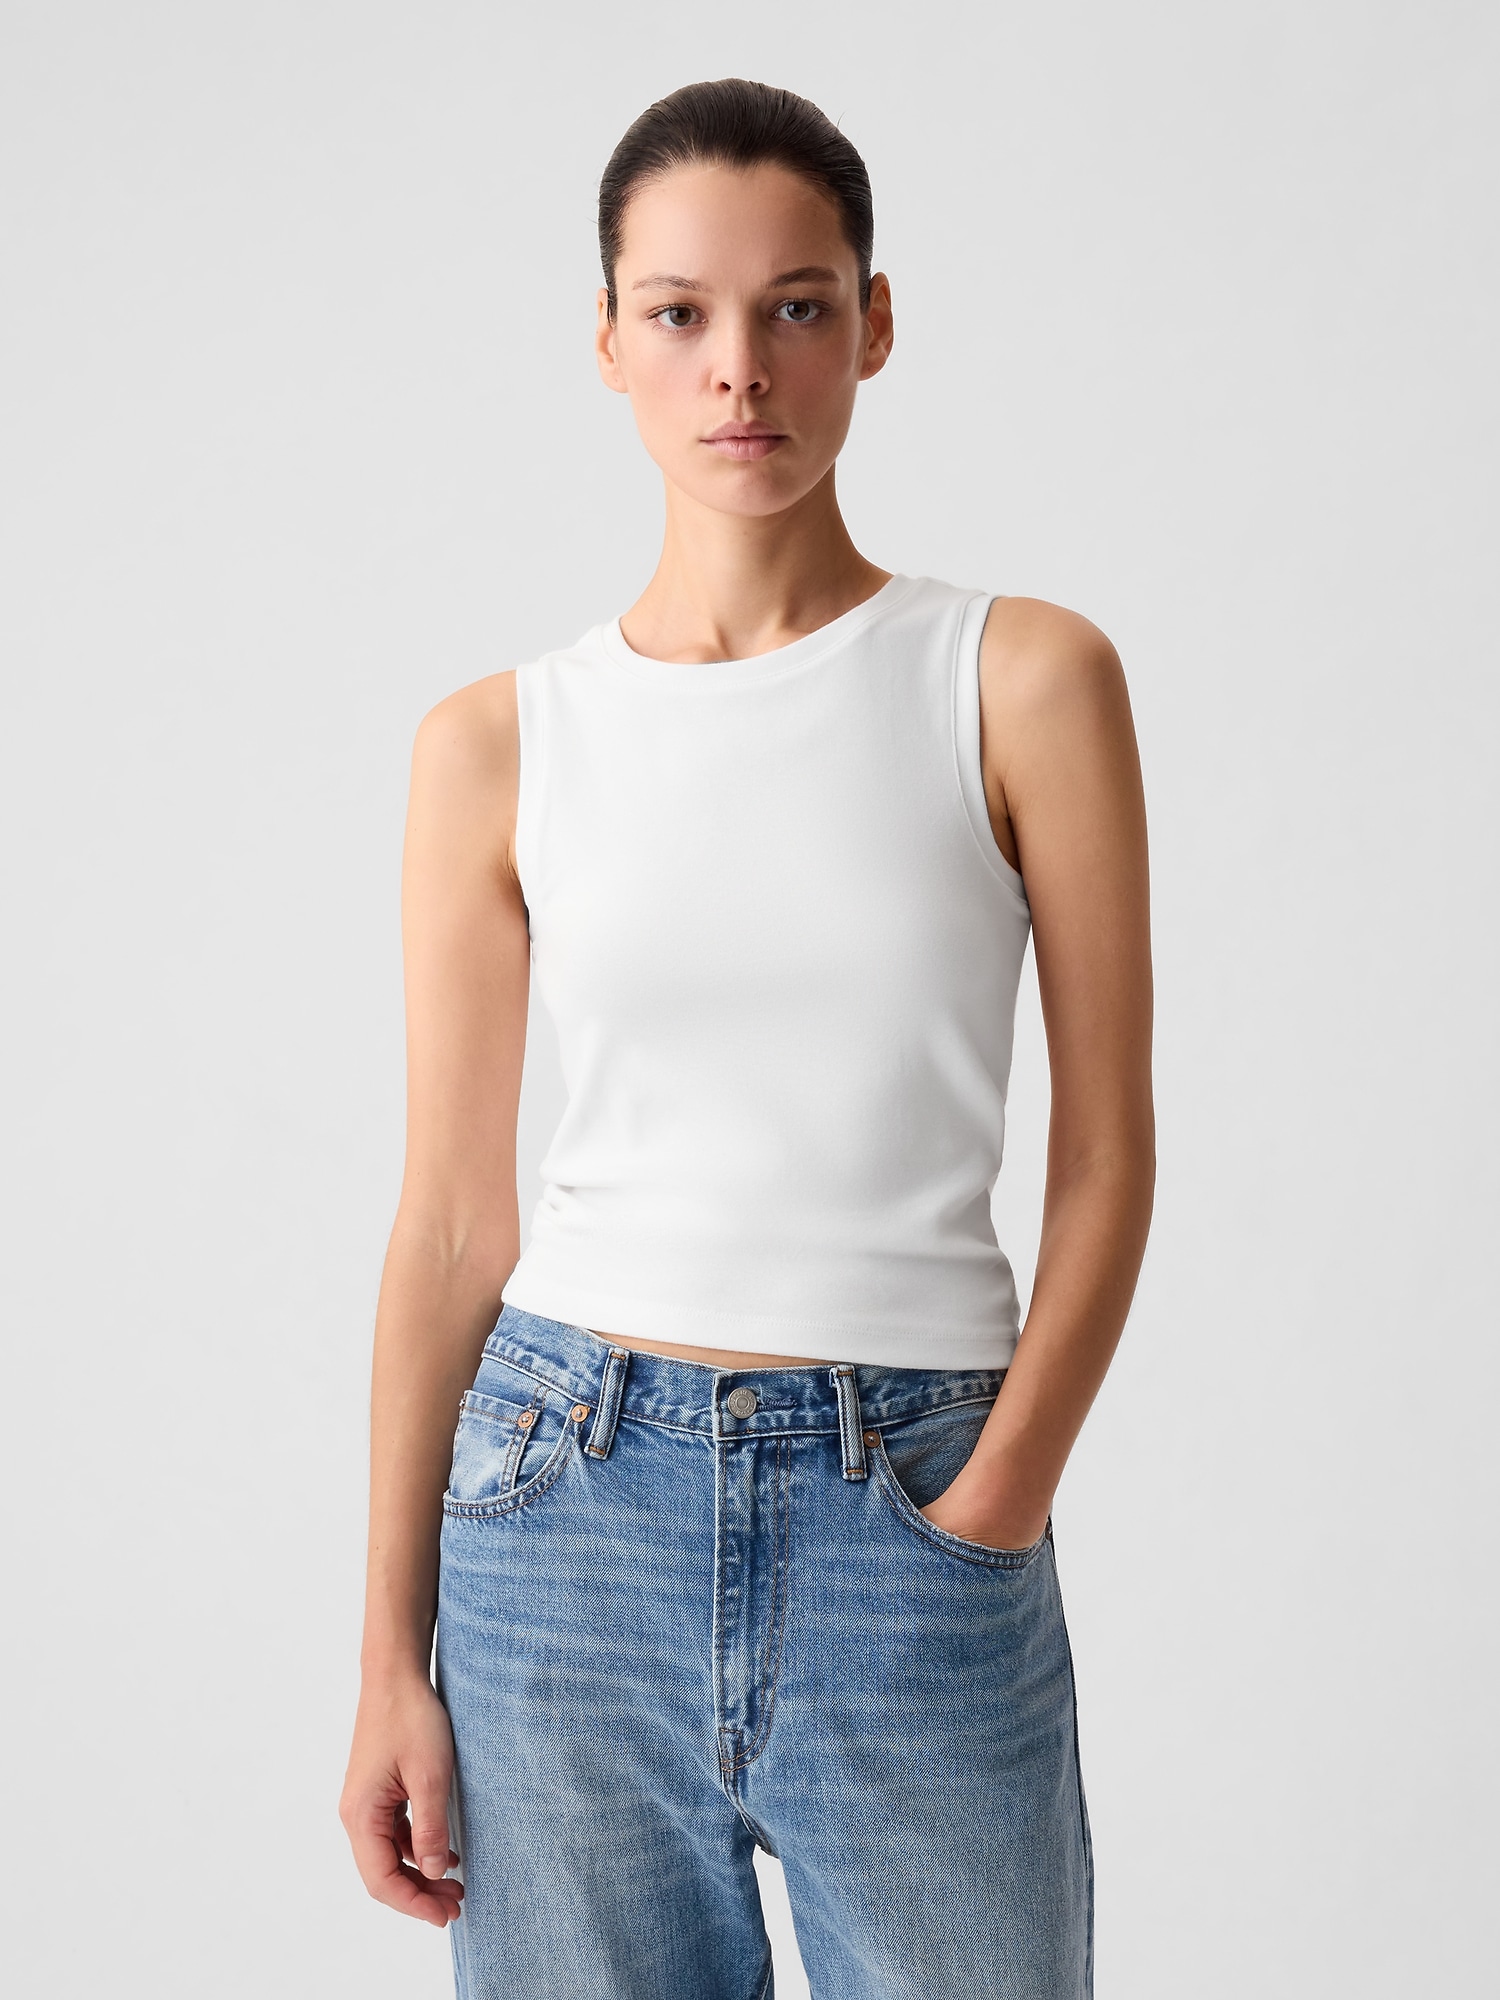 Shell Camisole